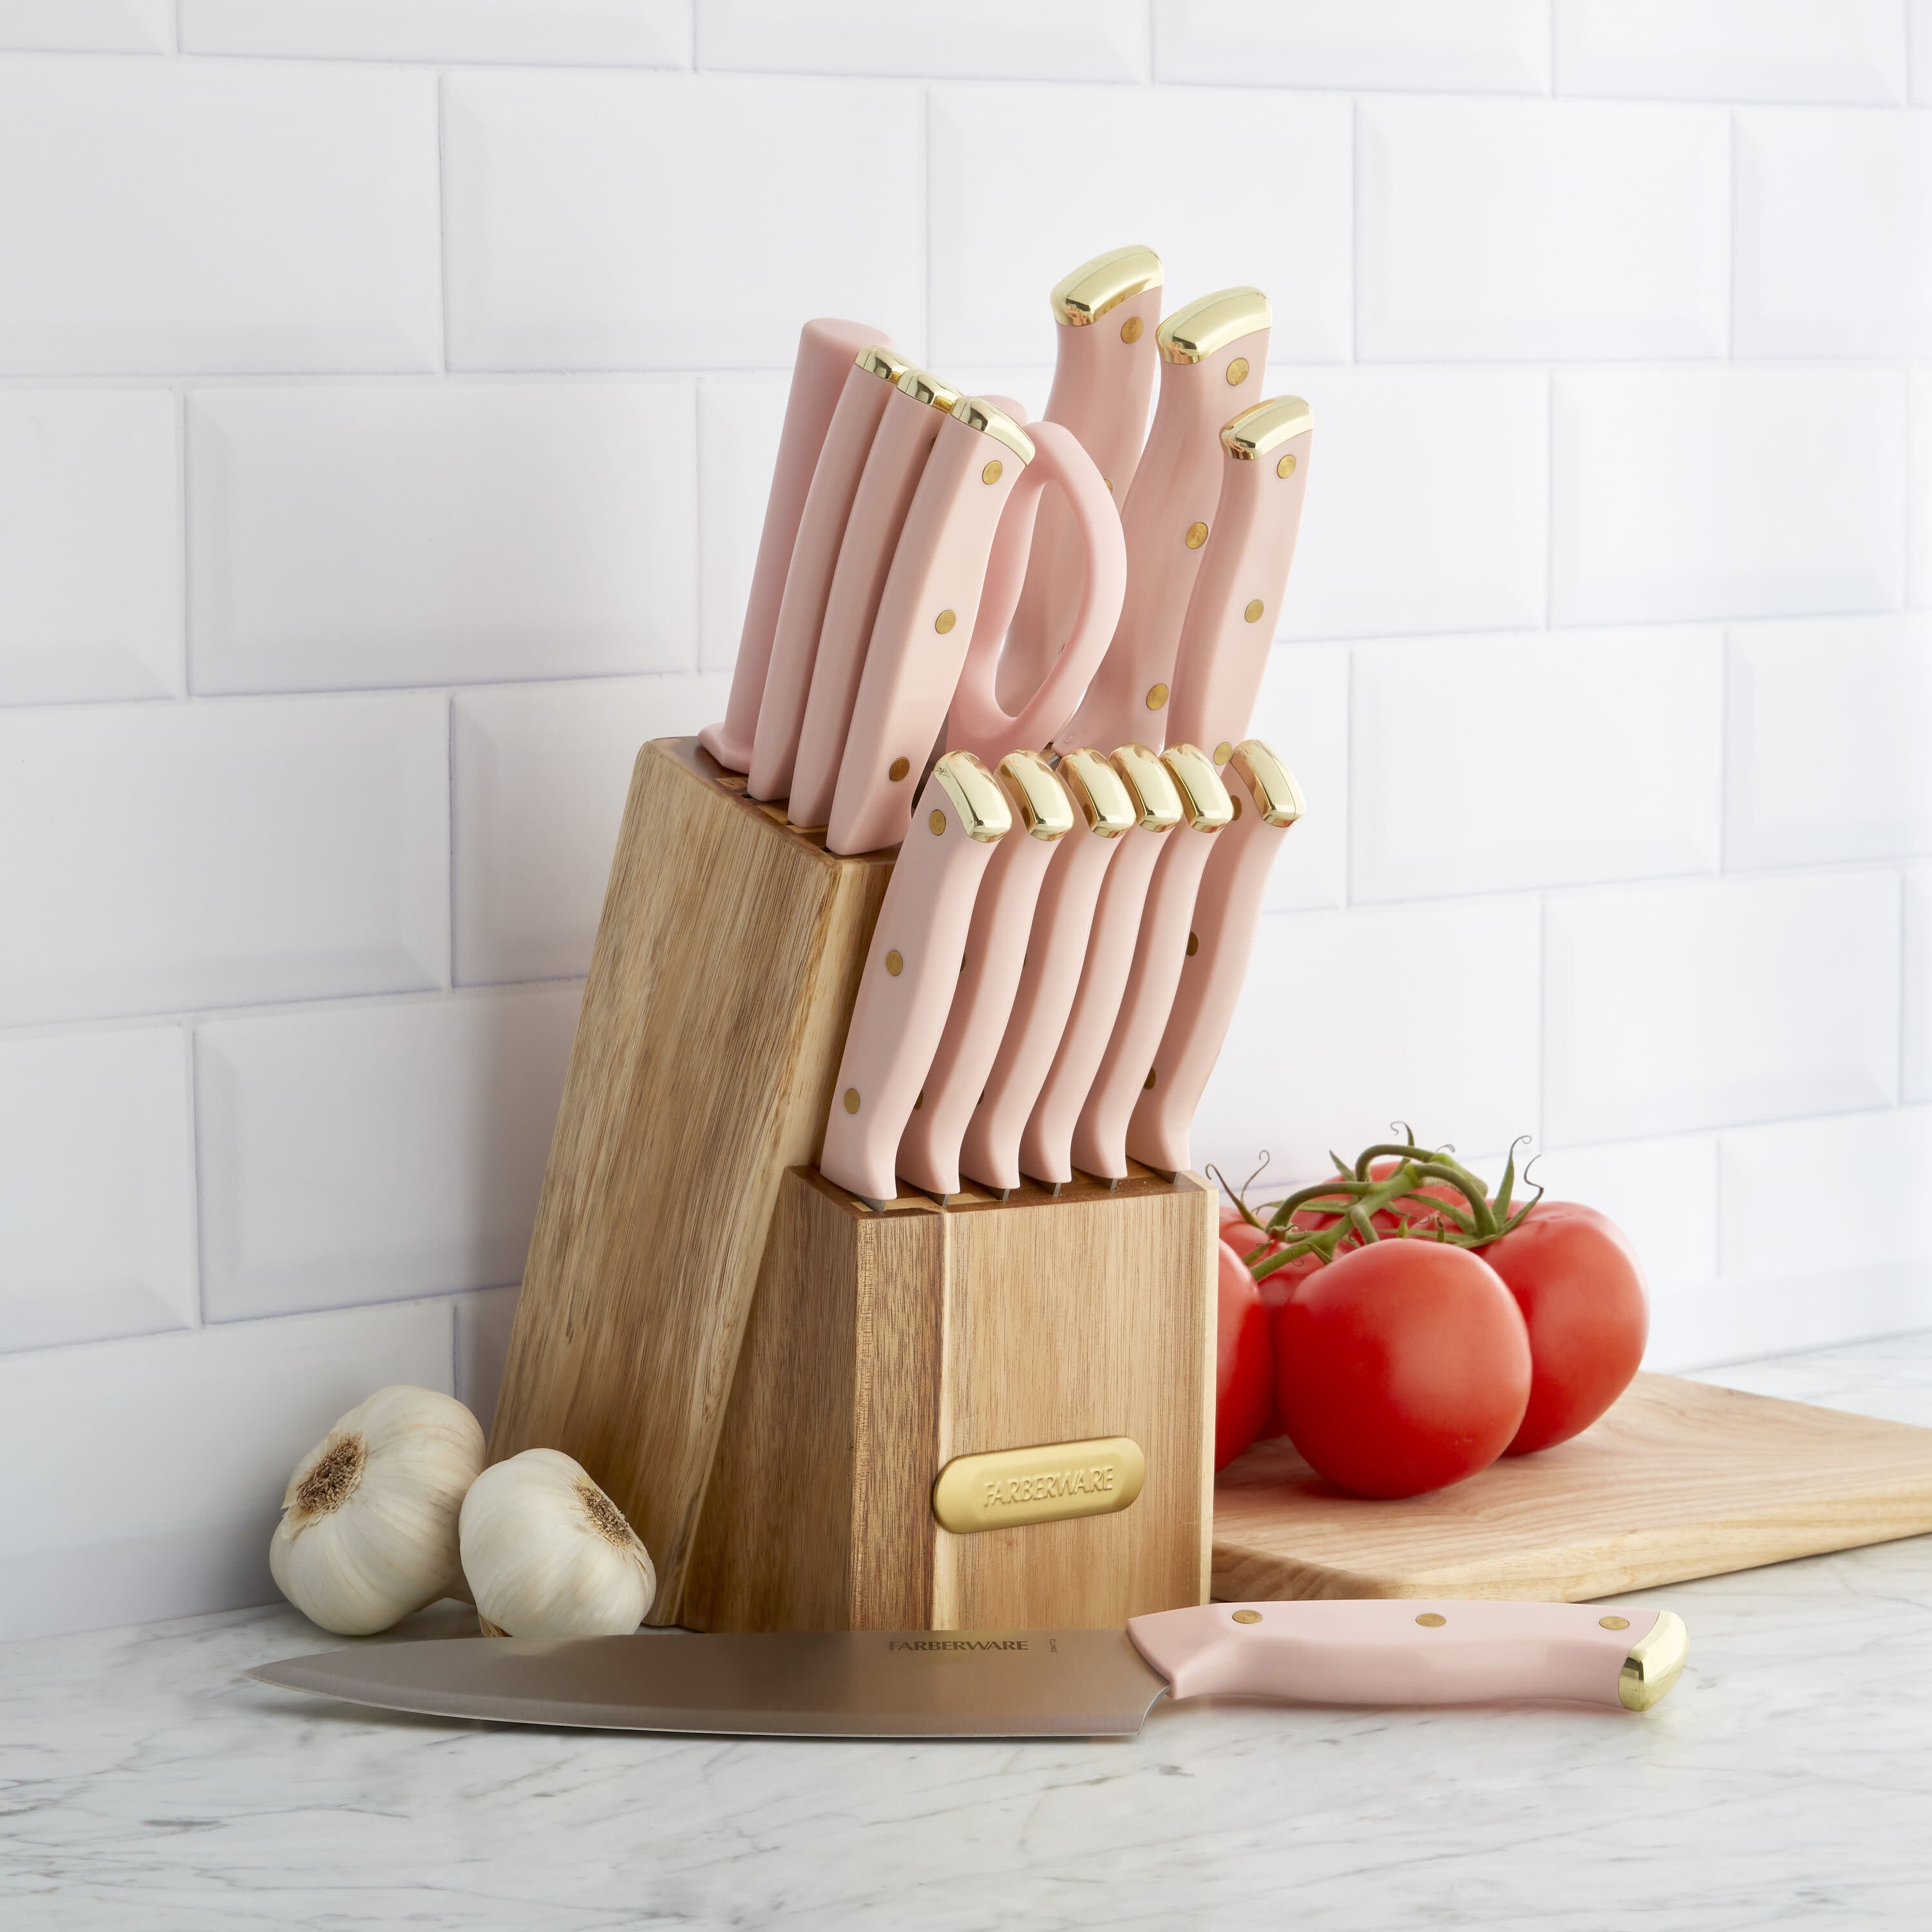 Farberware Triple Riveted Acacia Knife Block Set 15-piece in Blush and Gold